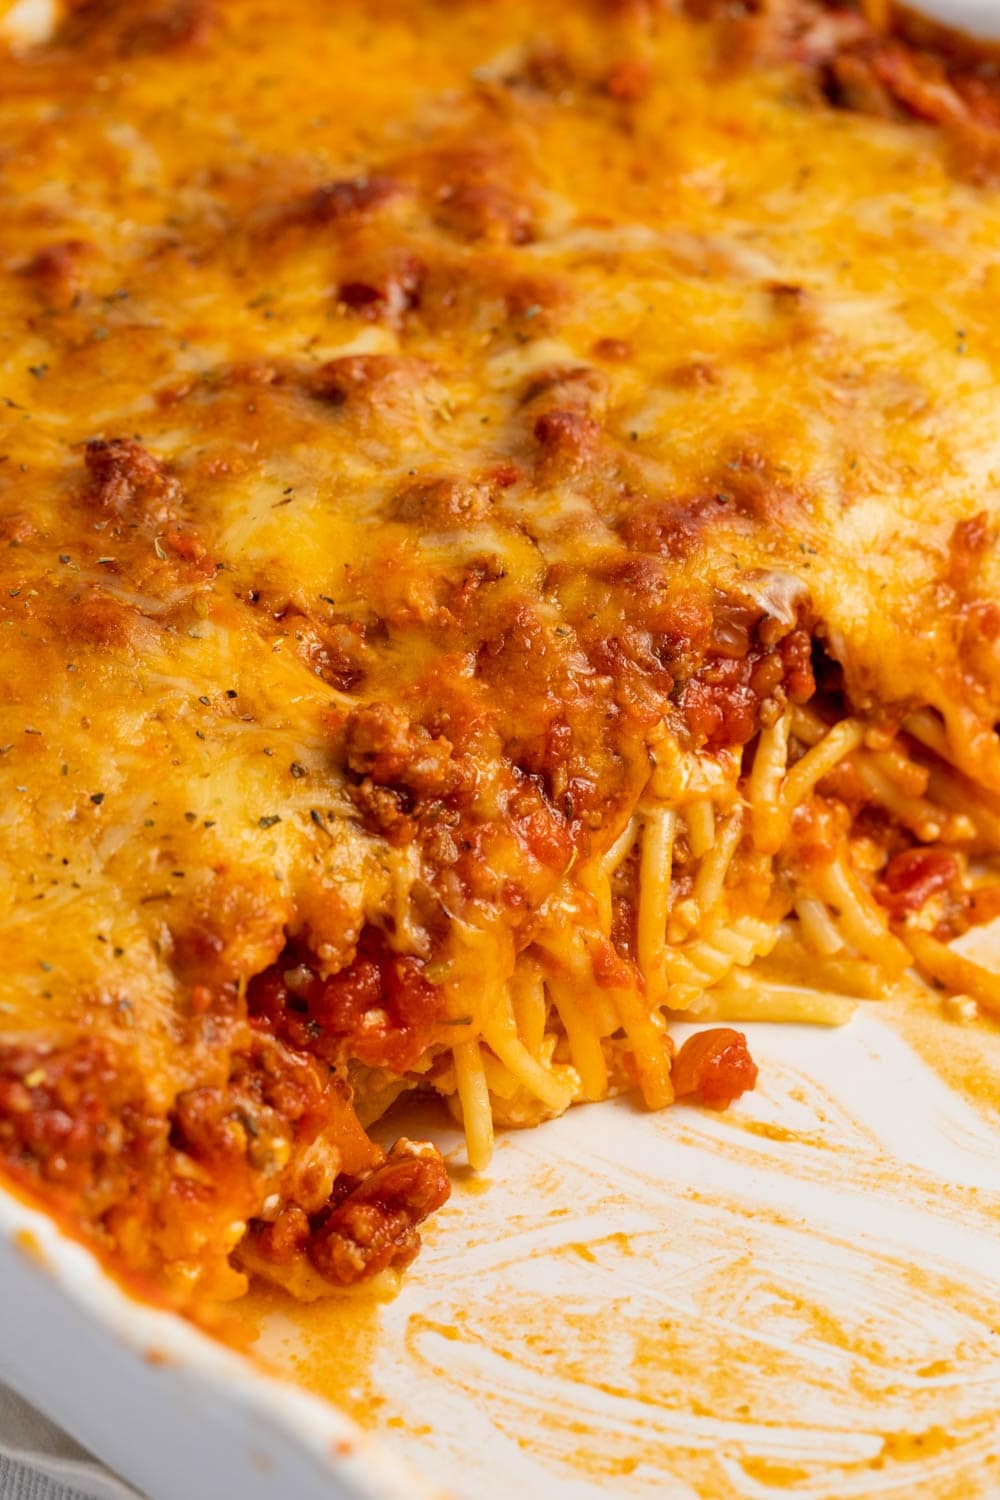 Closeup of Baked Spaghetti with Ground Beef and Melted Cheese on Top